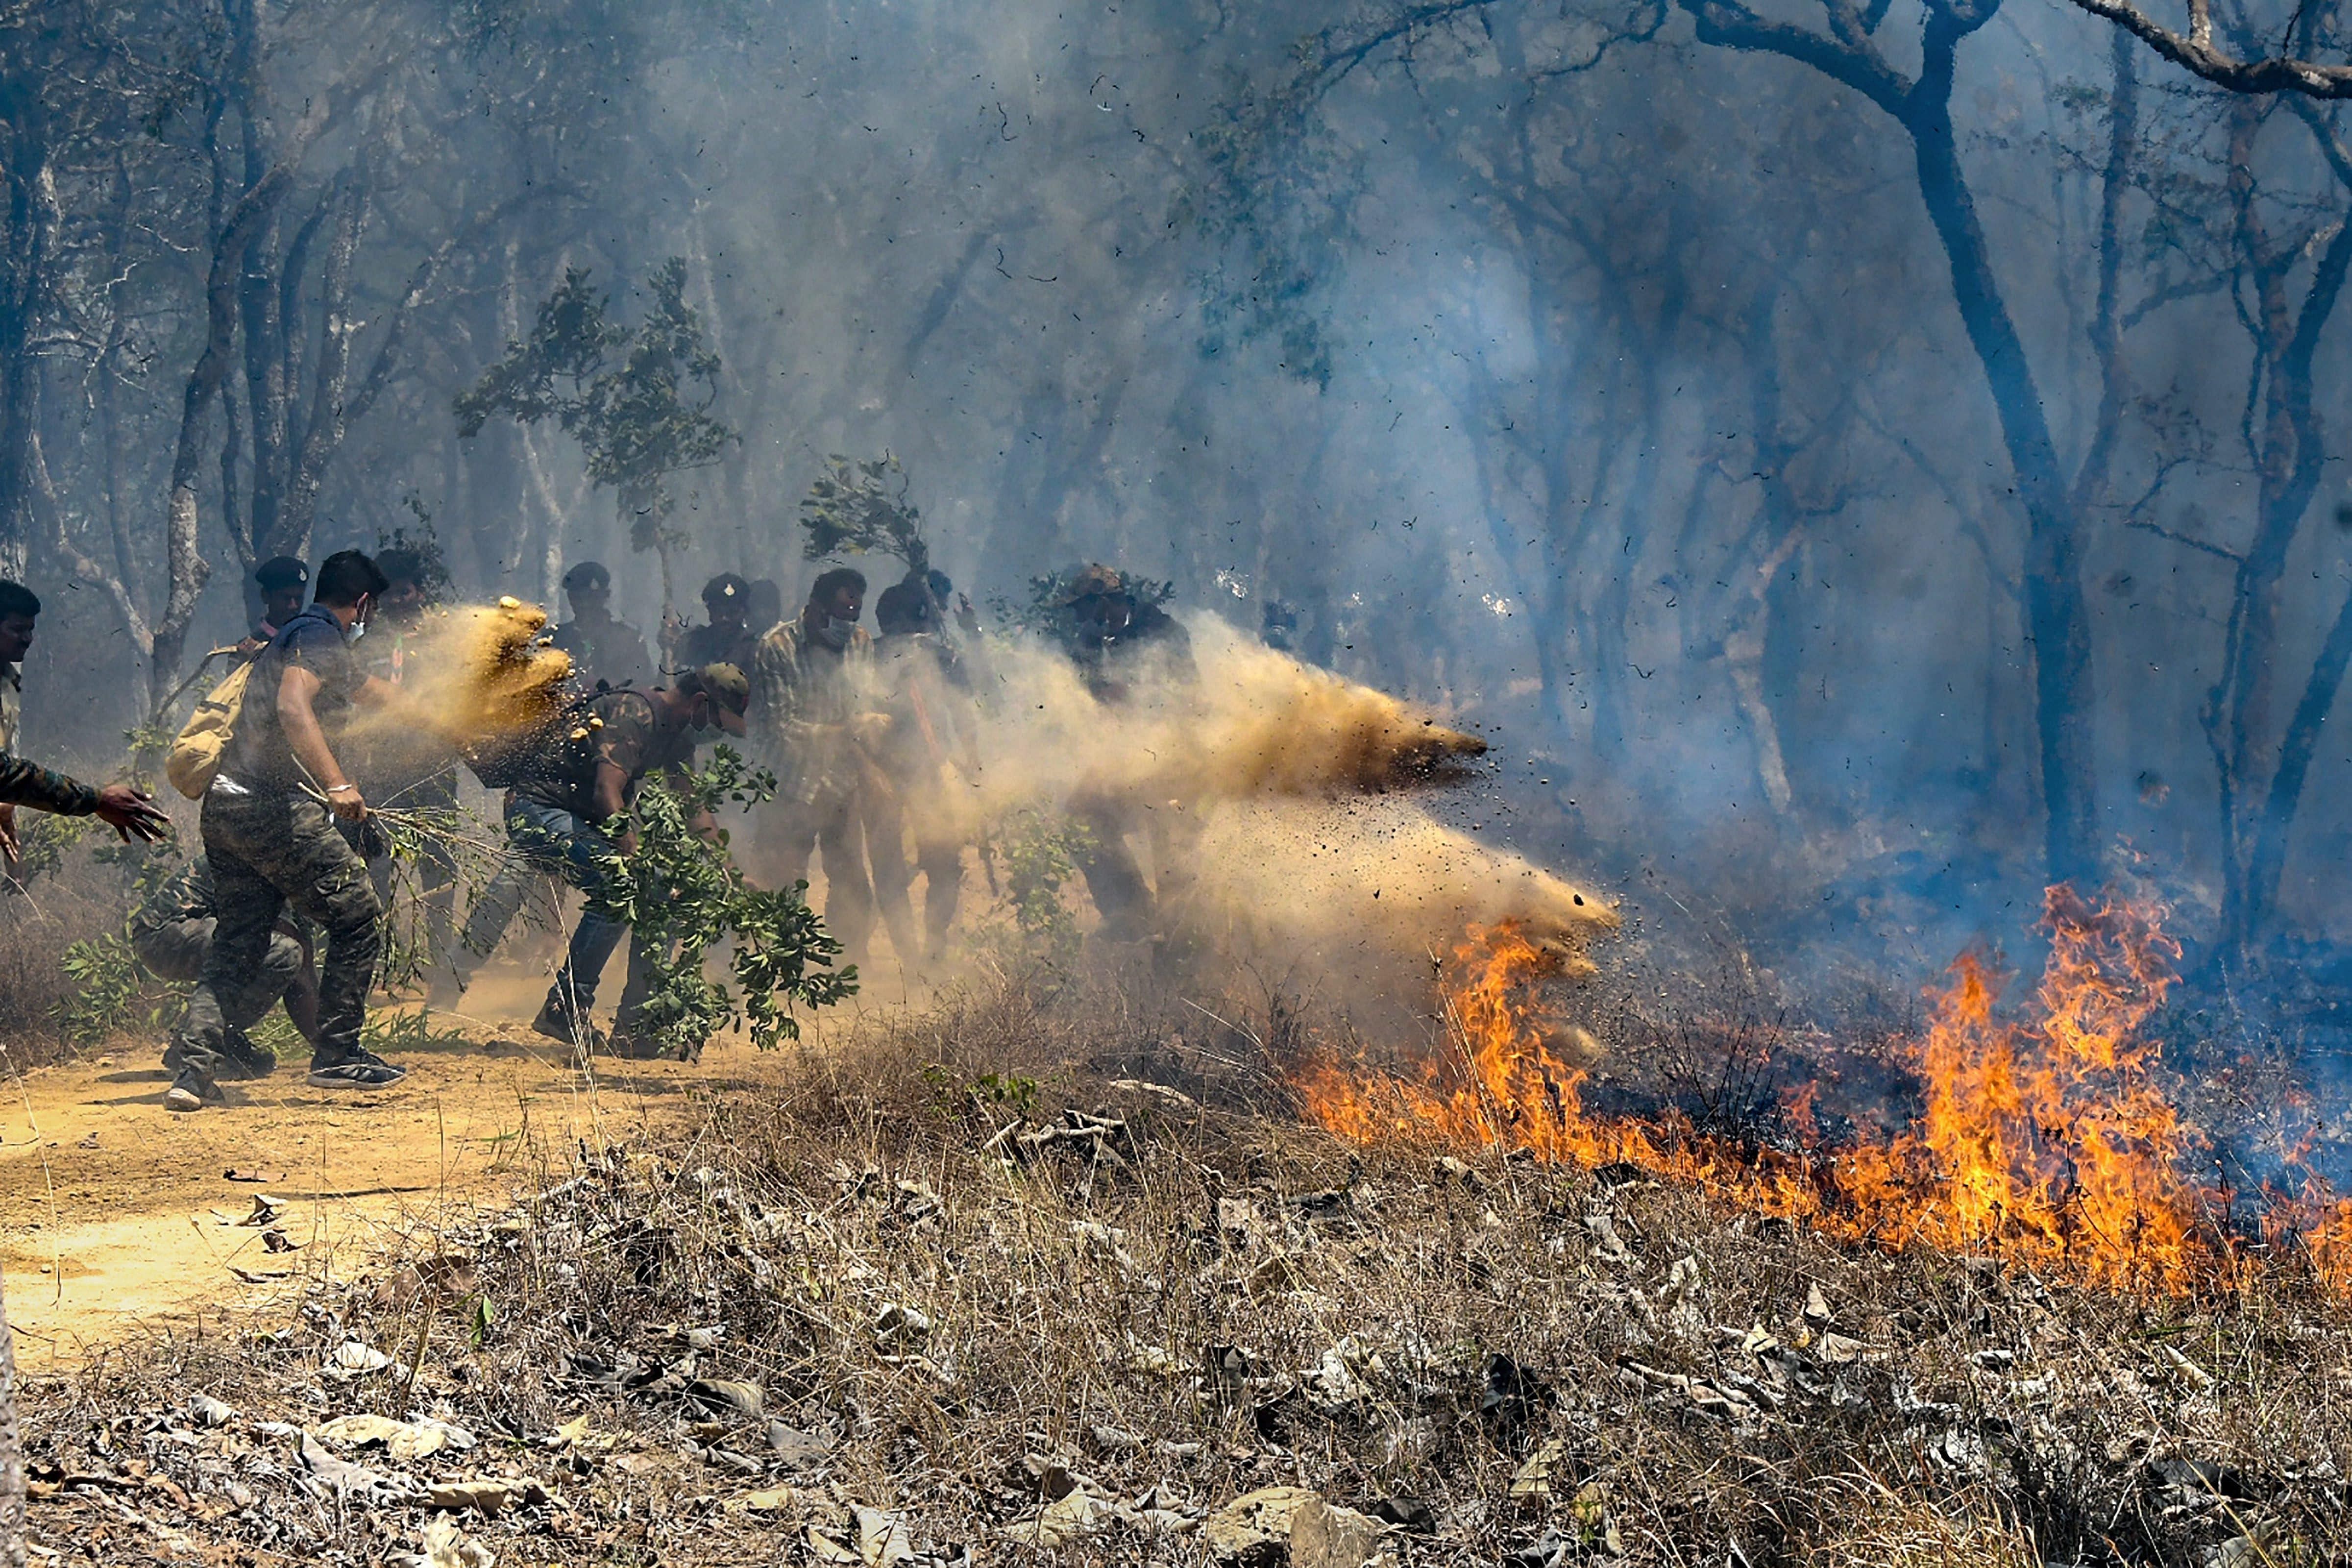 Rescue officials assist in extinguishing a forest fire at Bandipur Tiger Reserve, in Bandipur, Sunday, Feb 24, 2019. (PTI Photo)